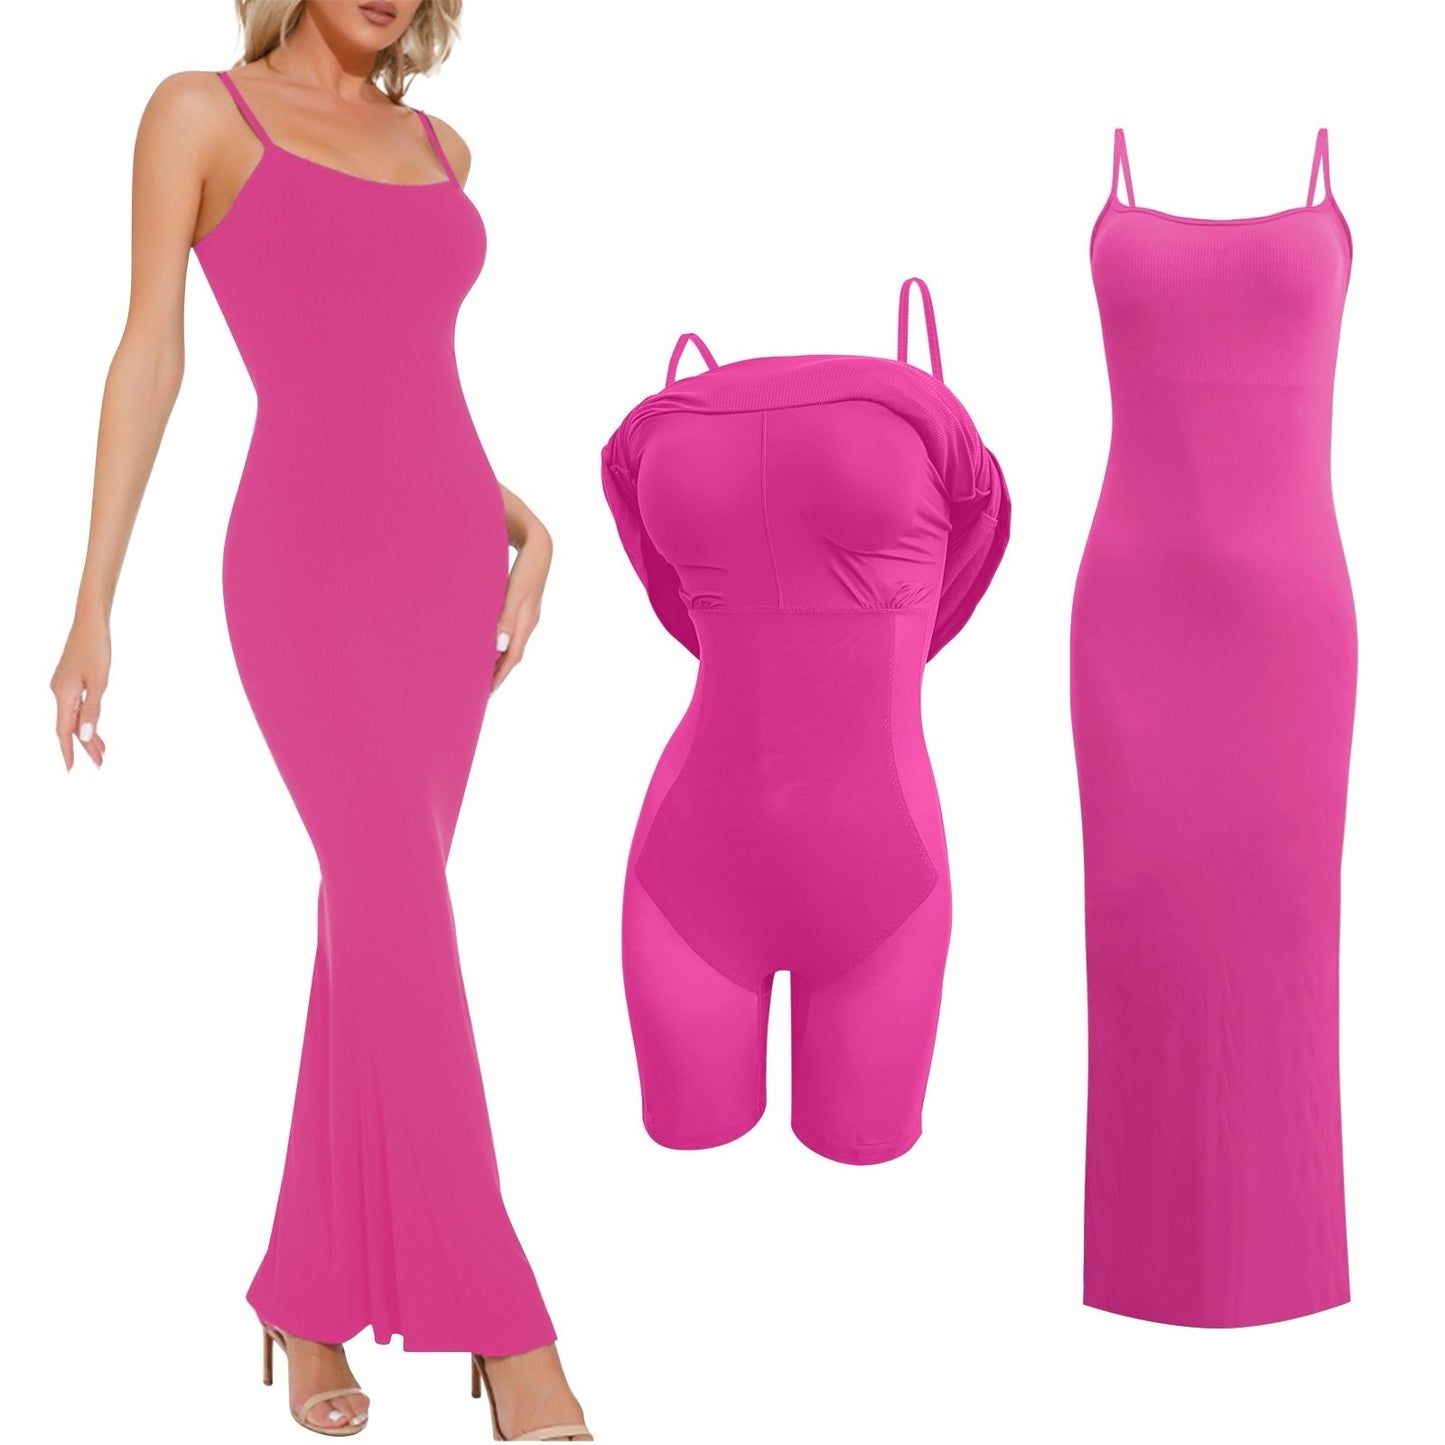 Women's Body Shaping Dress Set With Breast Pad Built In Body Shaping Underwear 8 In 1 Cocktail Two Piece Solid Dress - integrityhomedecor